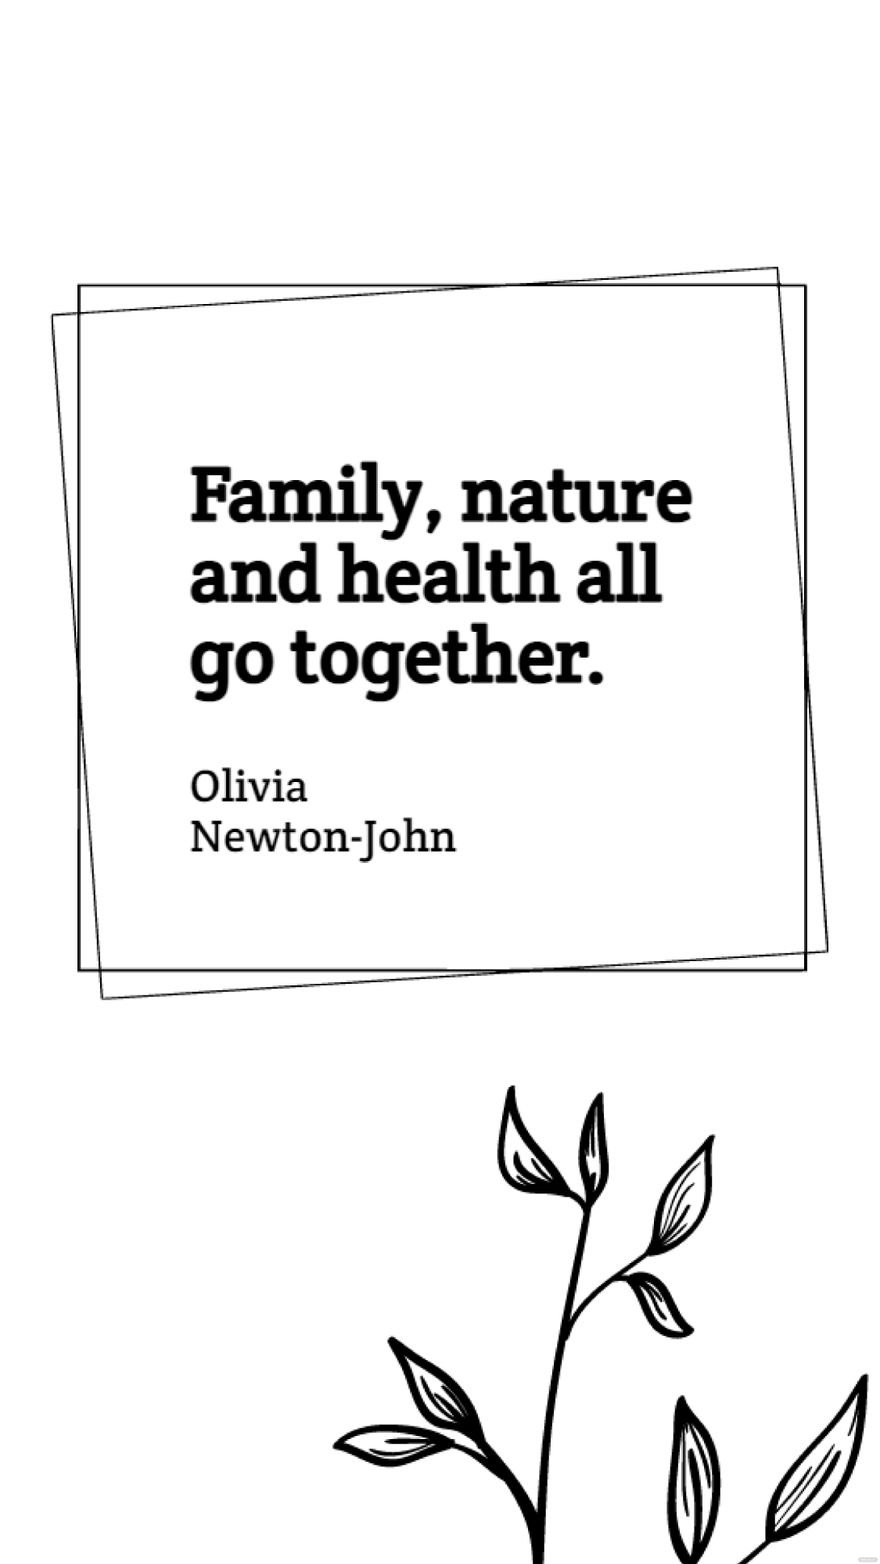 Free Olivia Newton-John - Family, nature and health all go together. in JPG